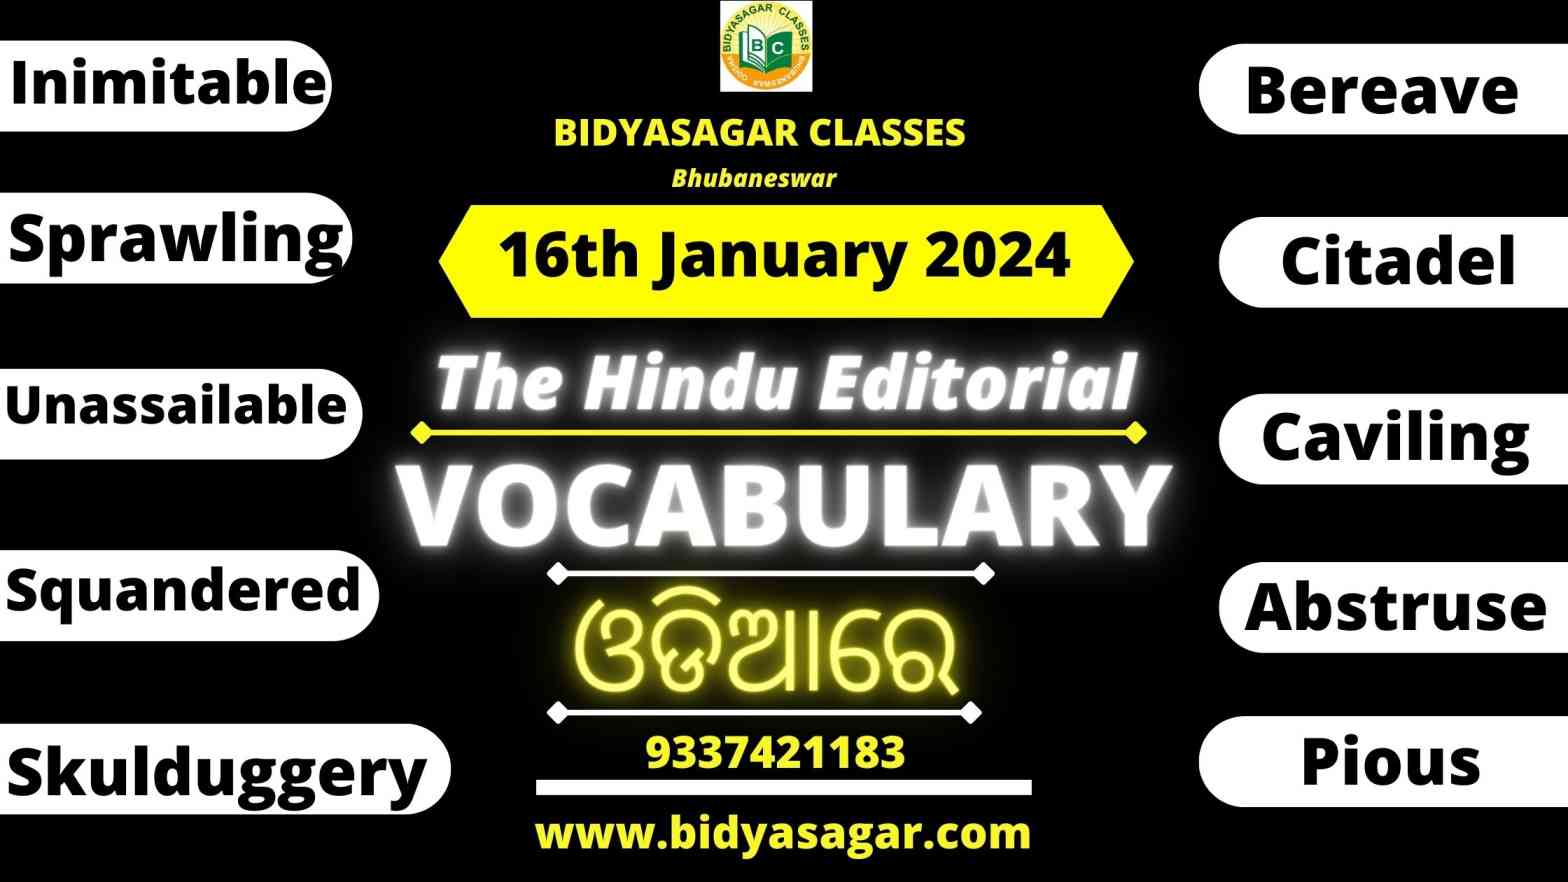 The Hindu Editorial Vocabulary of 16th January 2024